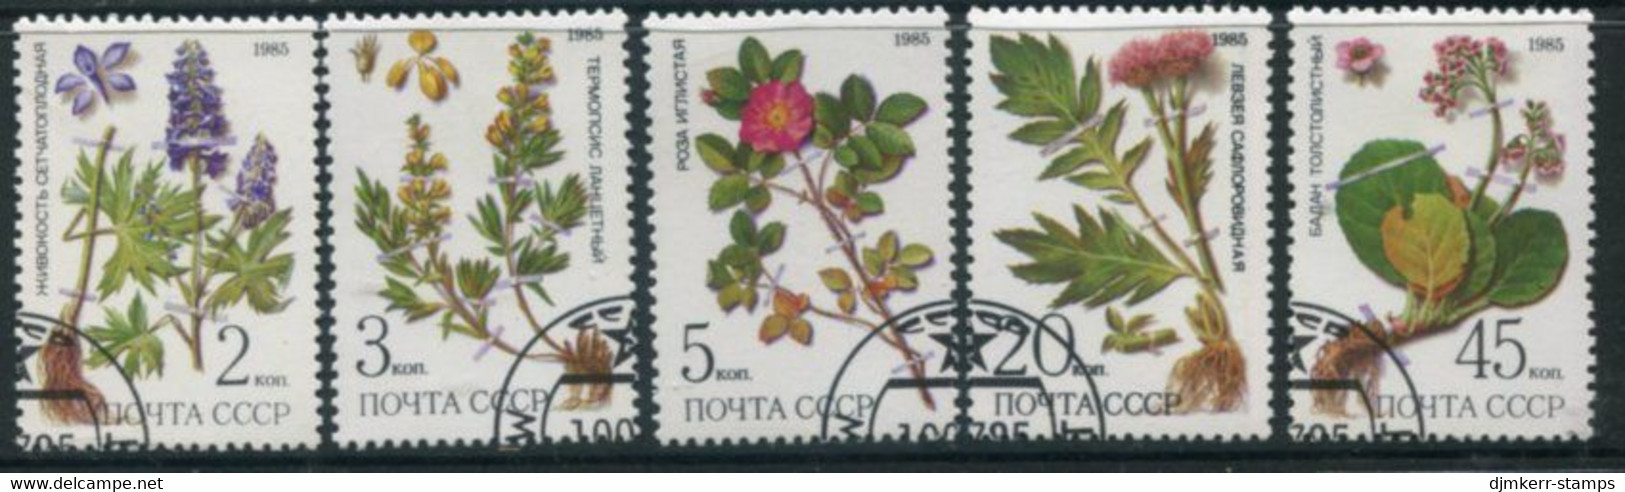 SOVIET UNION 1985 Medicinal Plants  Used.  Michel 5528-32 - Used Stamps